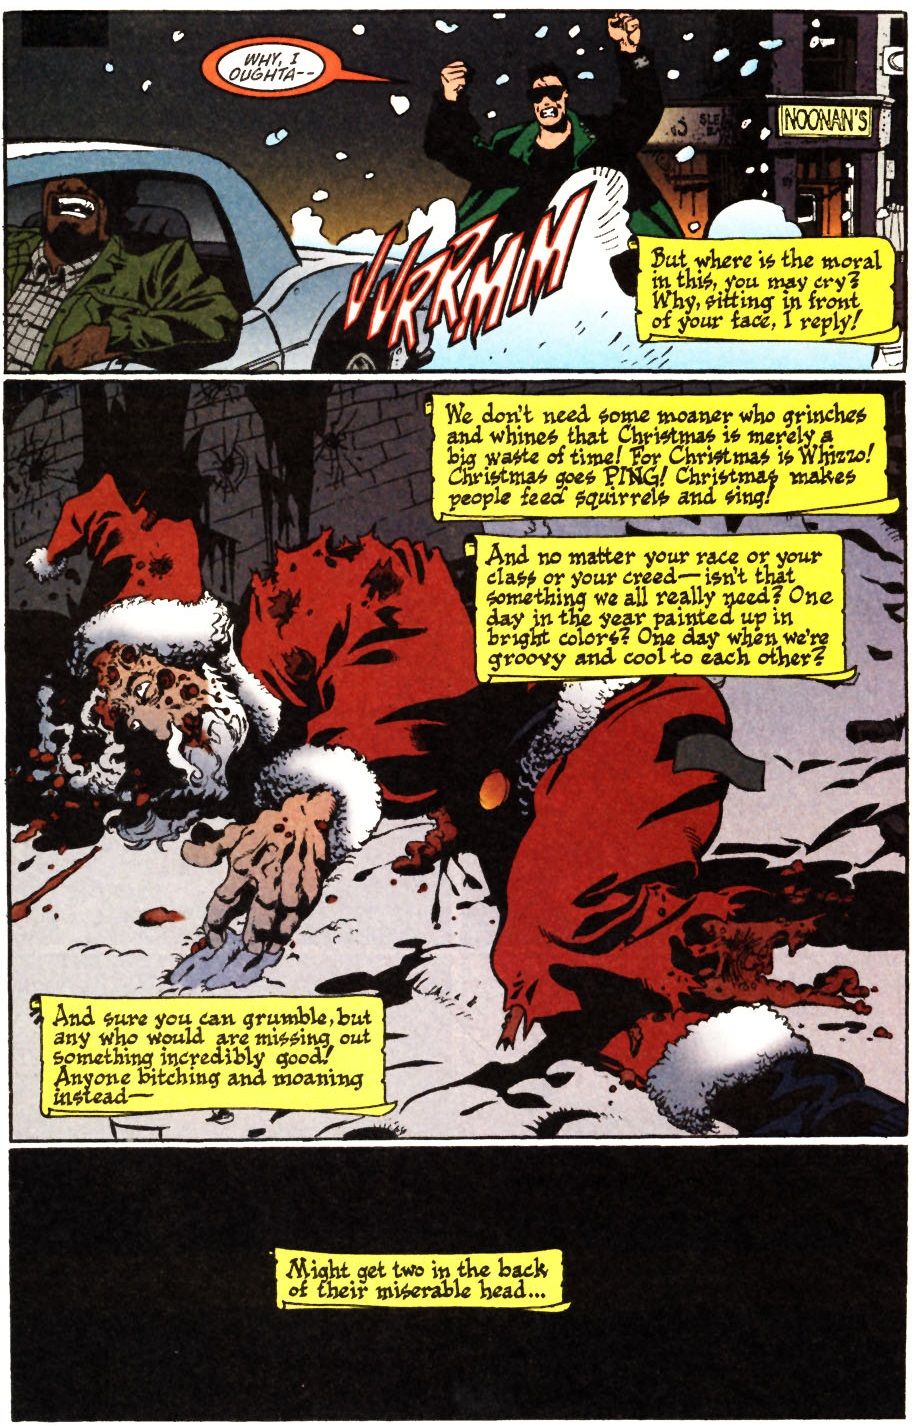 The issue ends with a strange lesson for Christmas